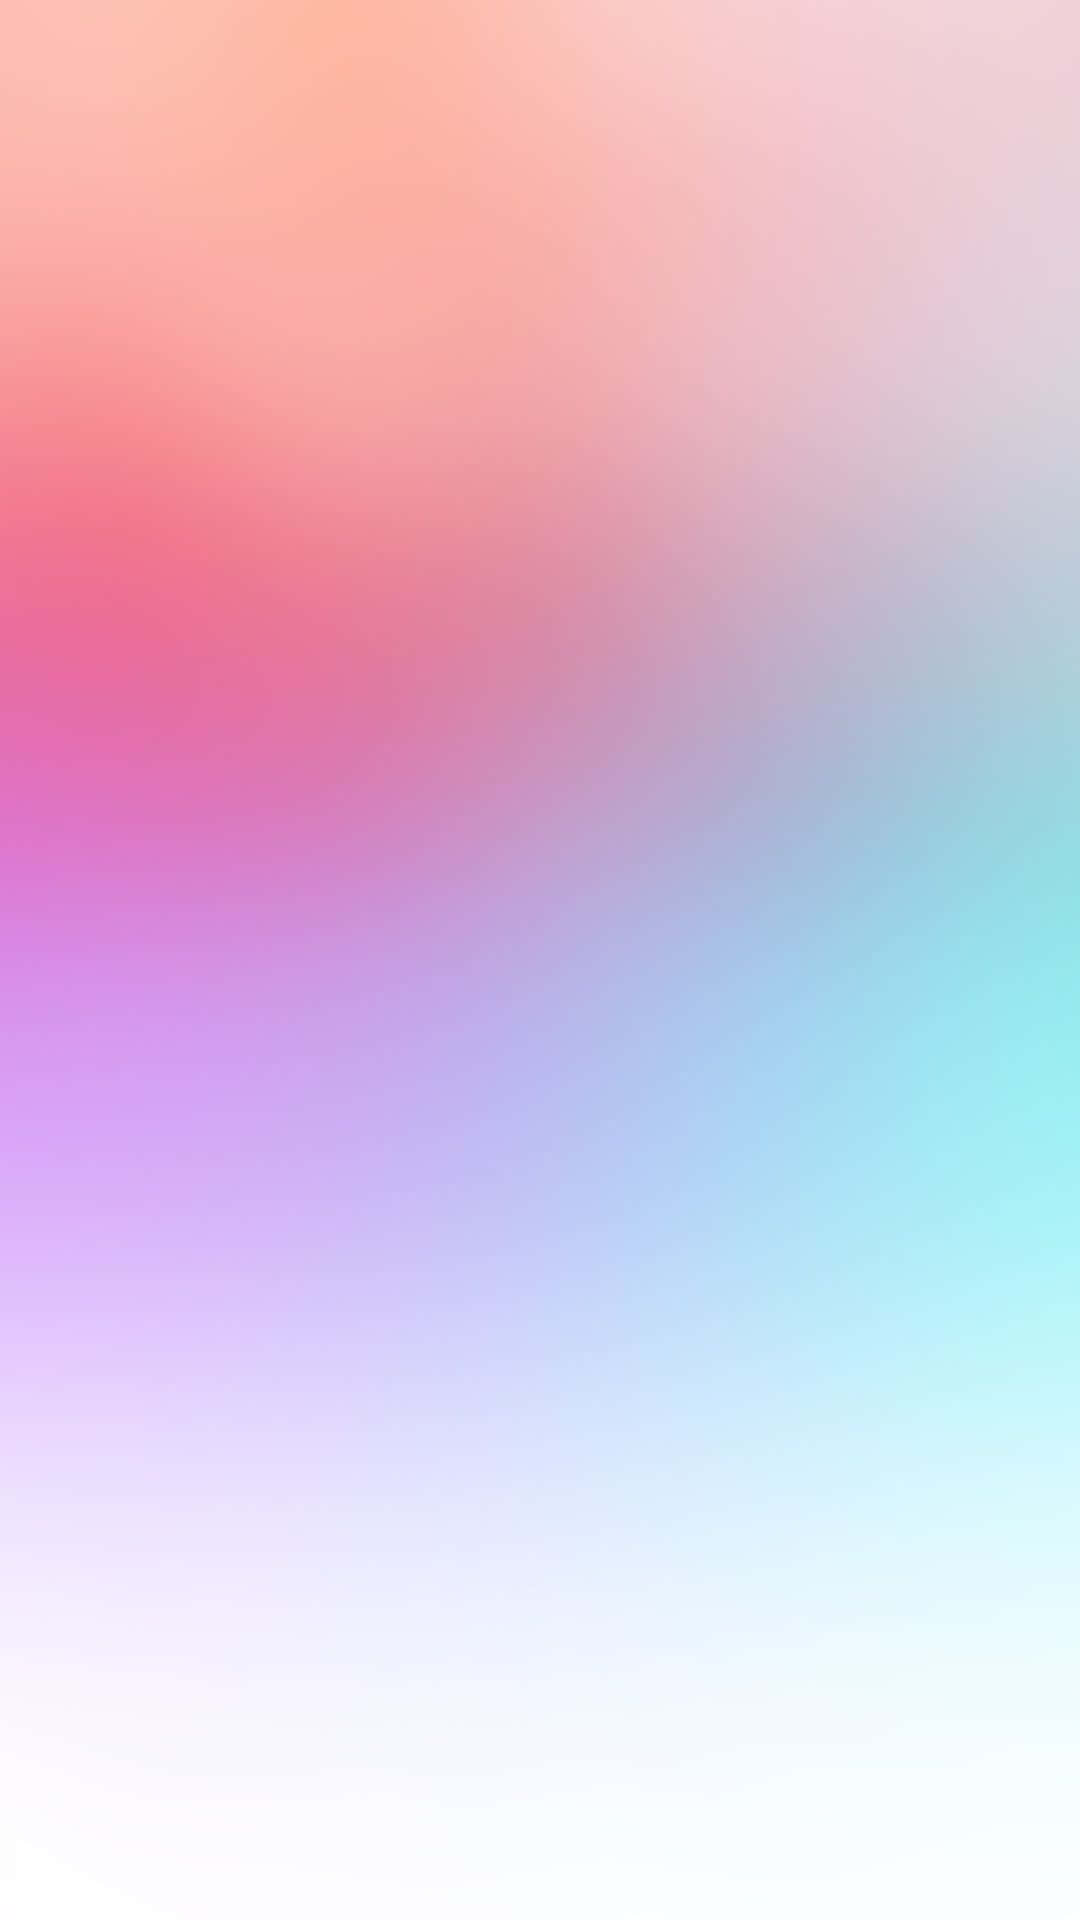 A Colorful Background With A Blurred Background